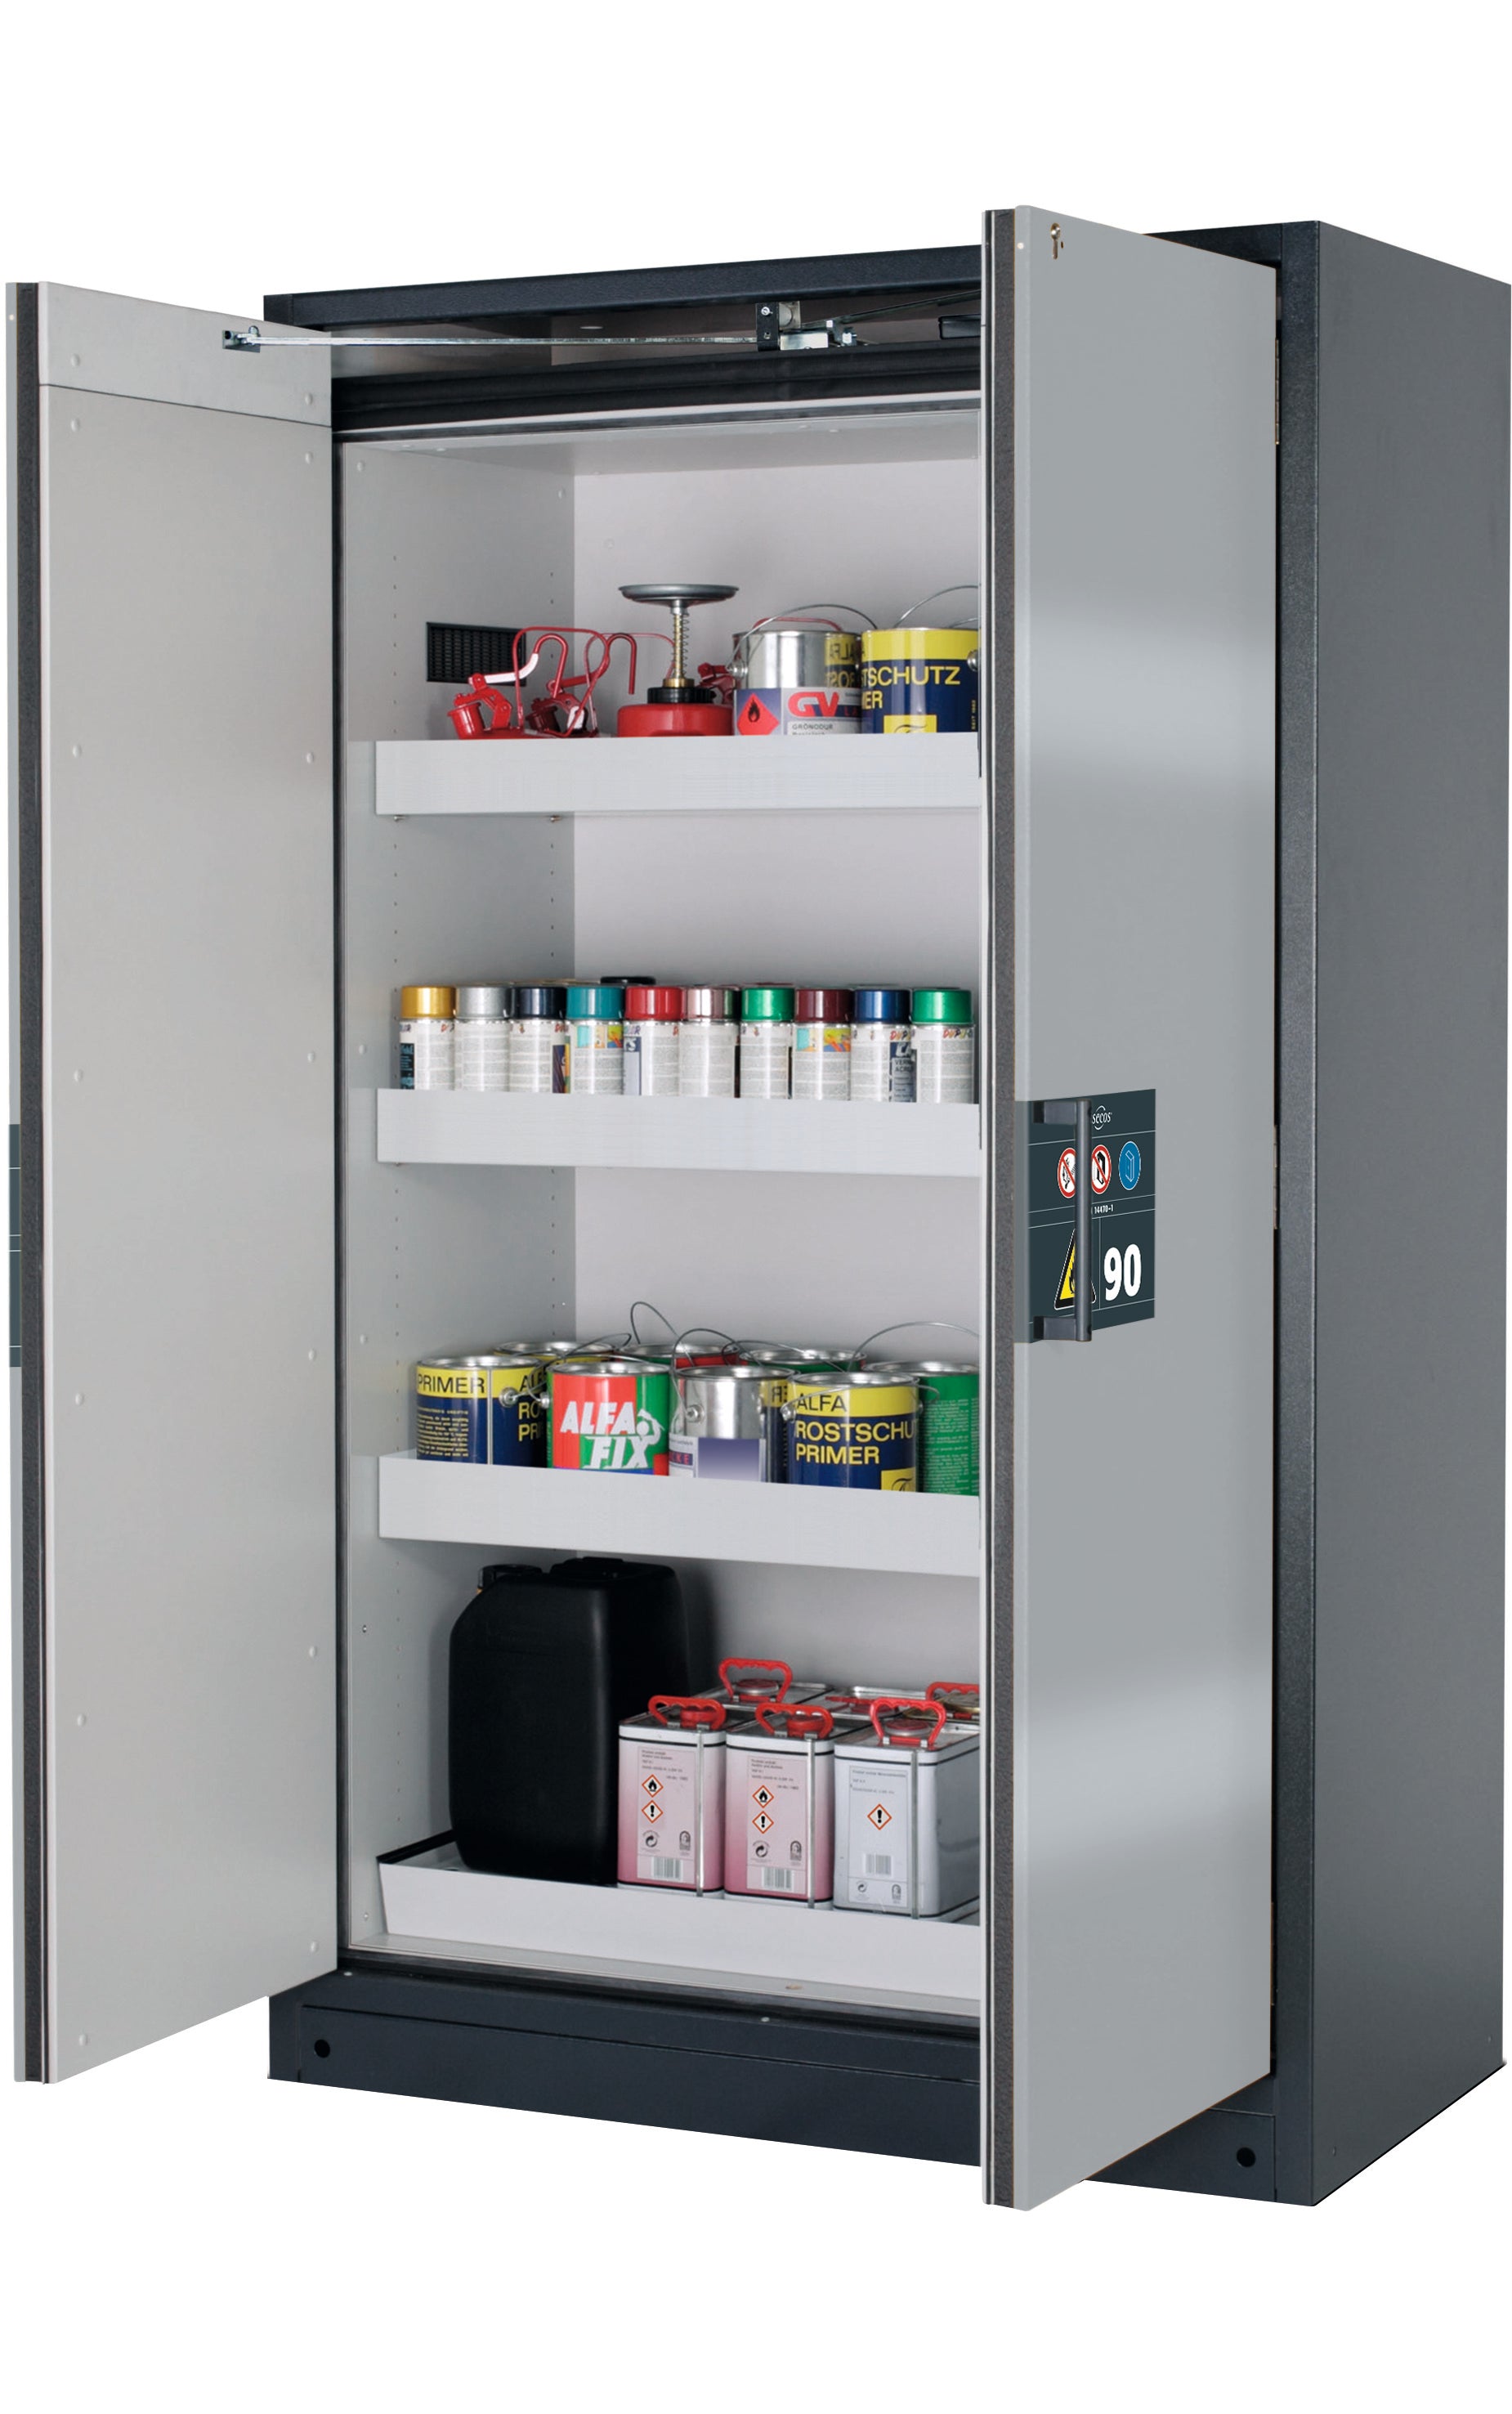 Type 90 safety storage cabinet Q-PEGASUS-90 model Q90.195.120.WDAC in asecos silver with 3x tray shelf (standard) (sheet steel),